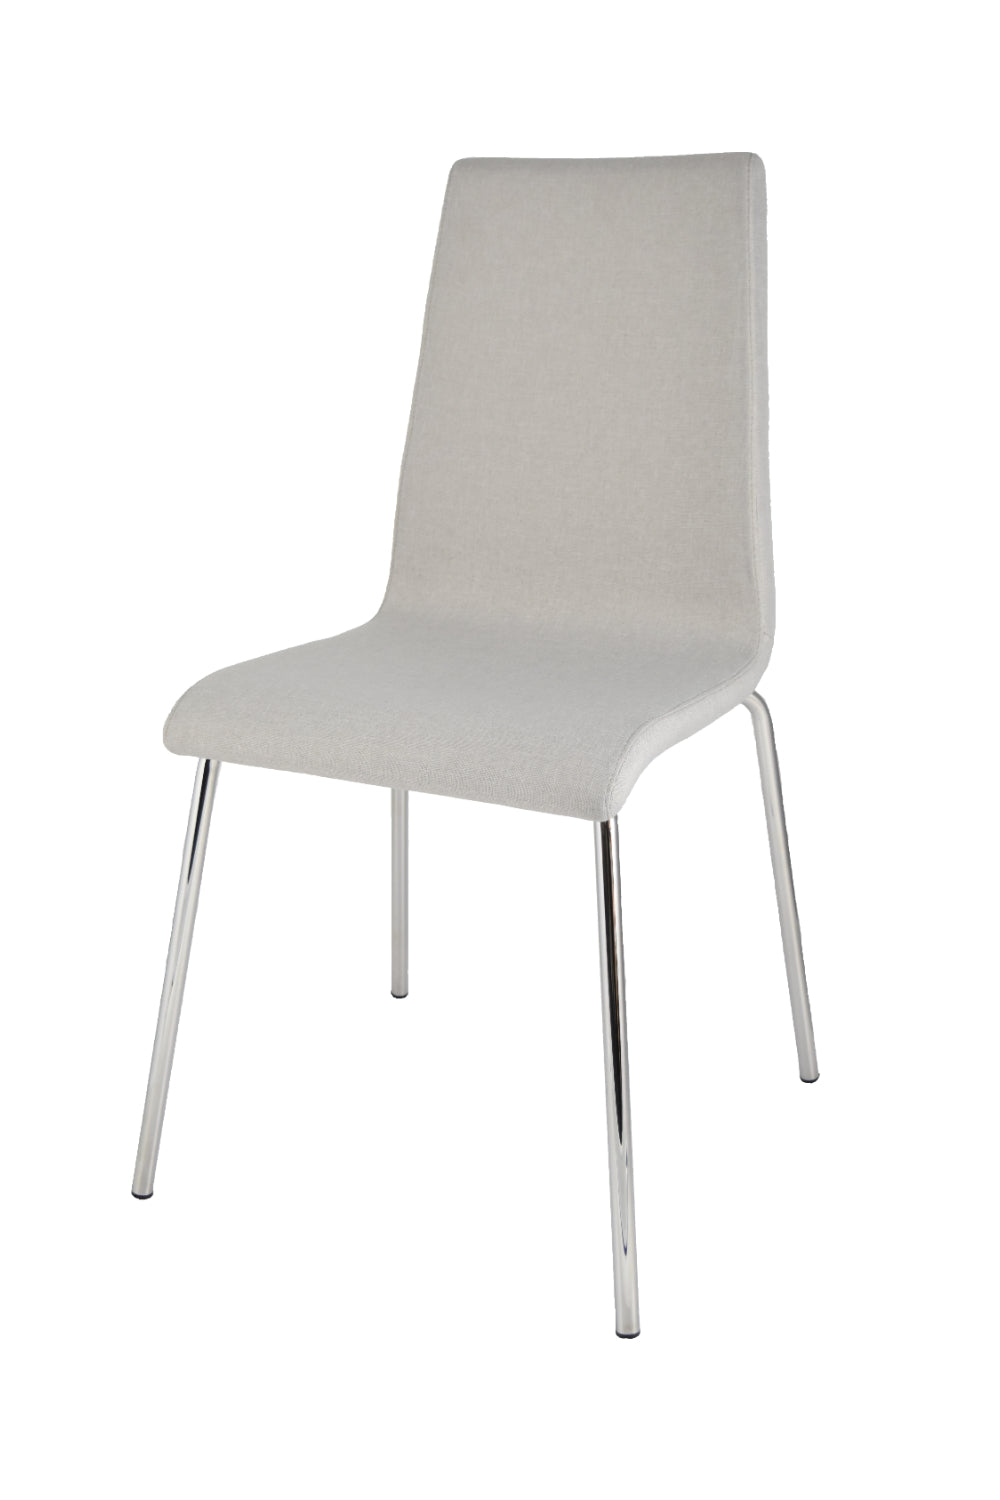 Chairs LISBONA with steel legs and seat in multilayer wood, upholstered in fabric colour pearl grey